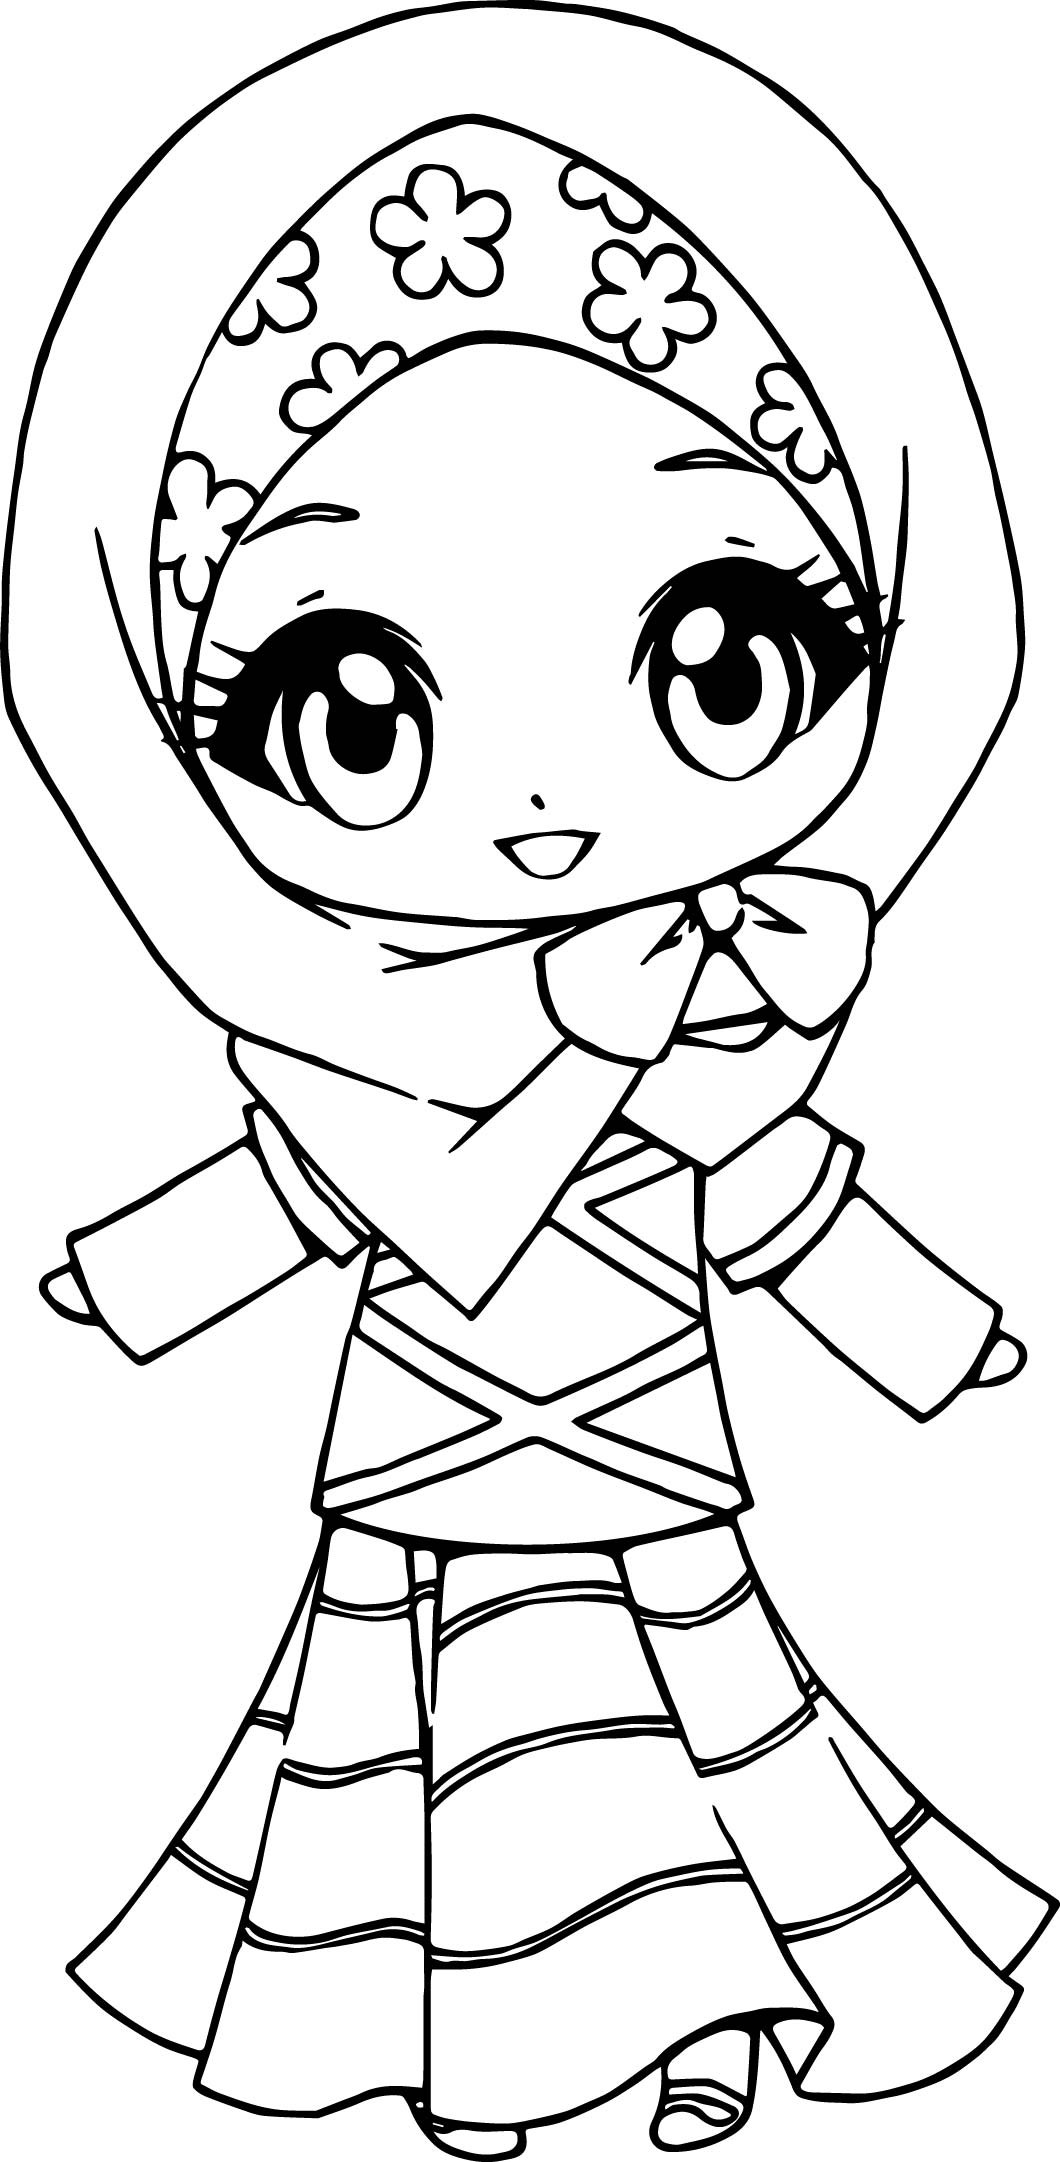 80+ Muslimah Coloring Pages 1